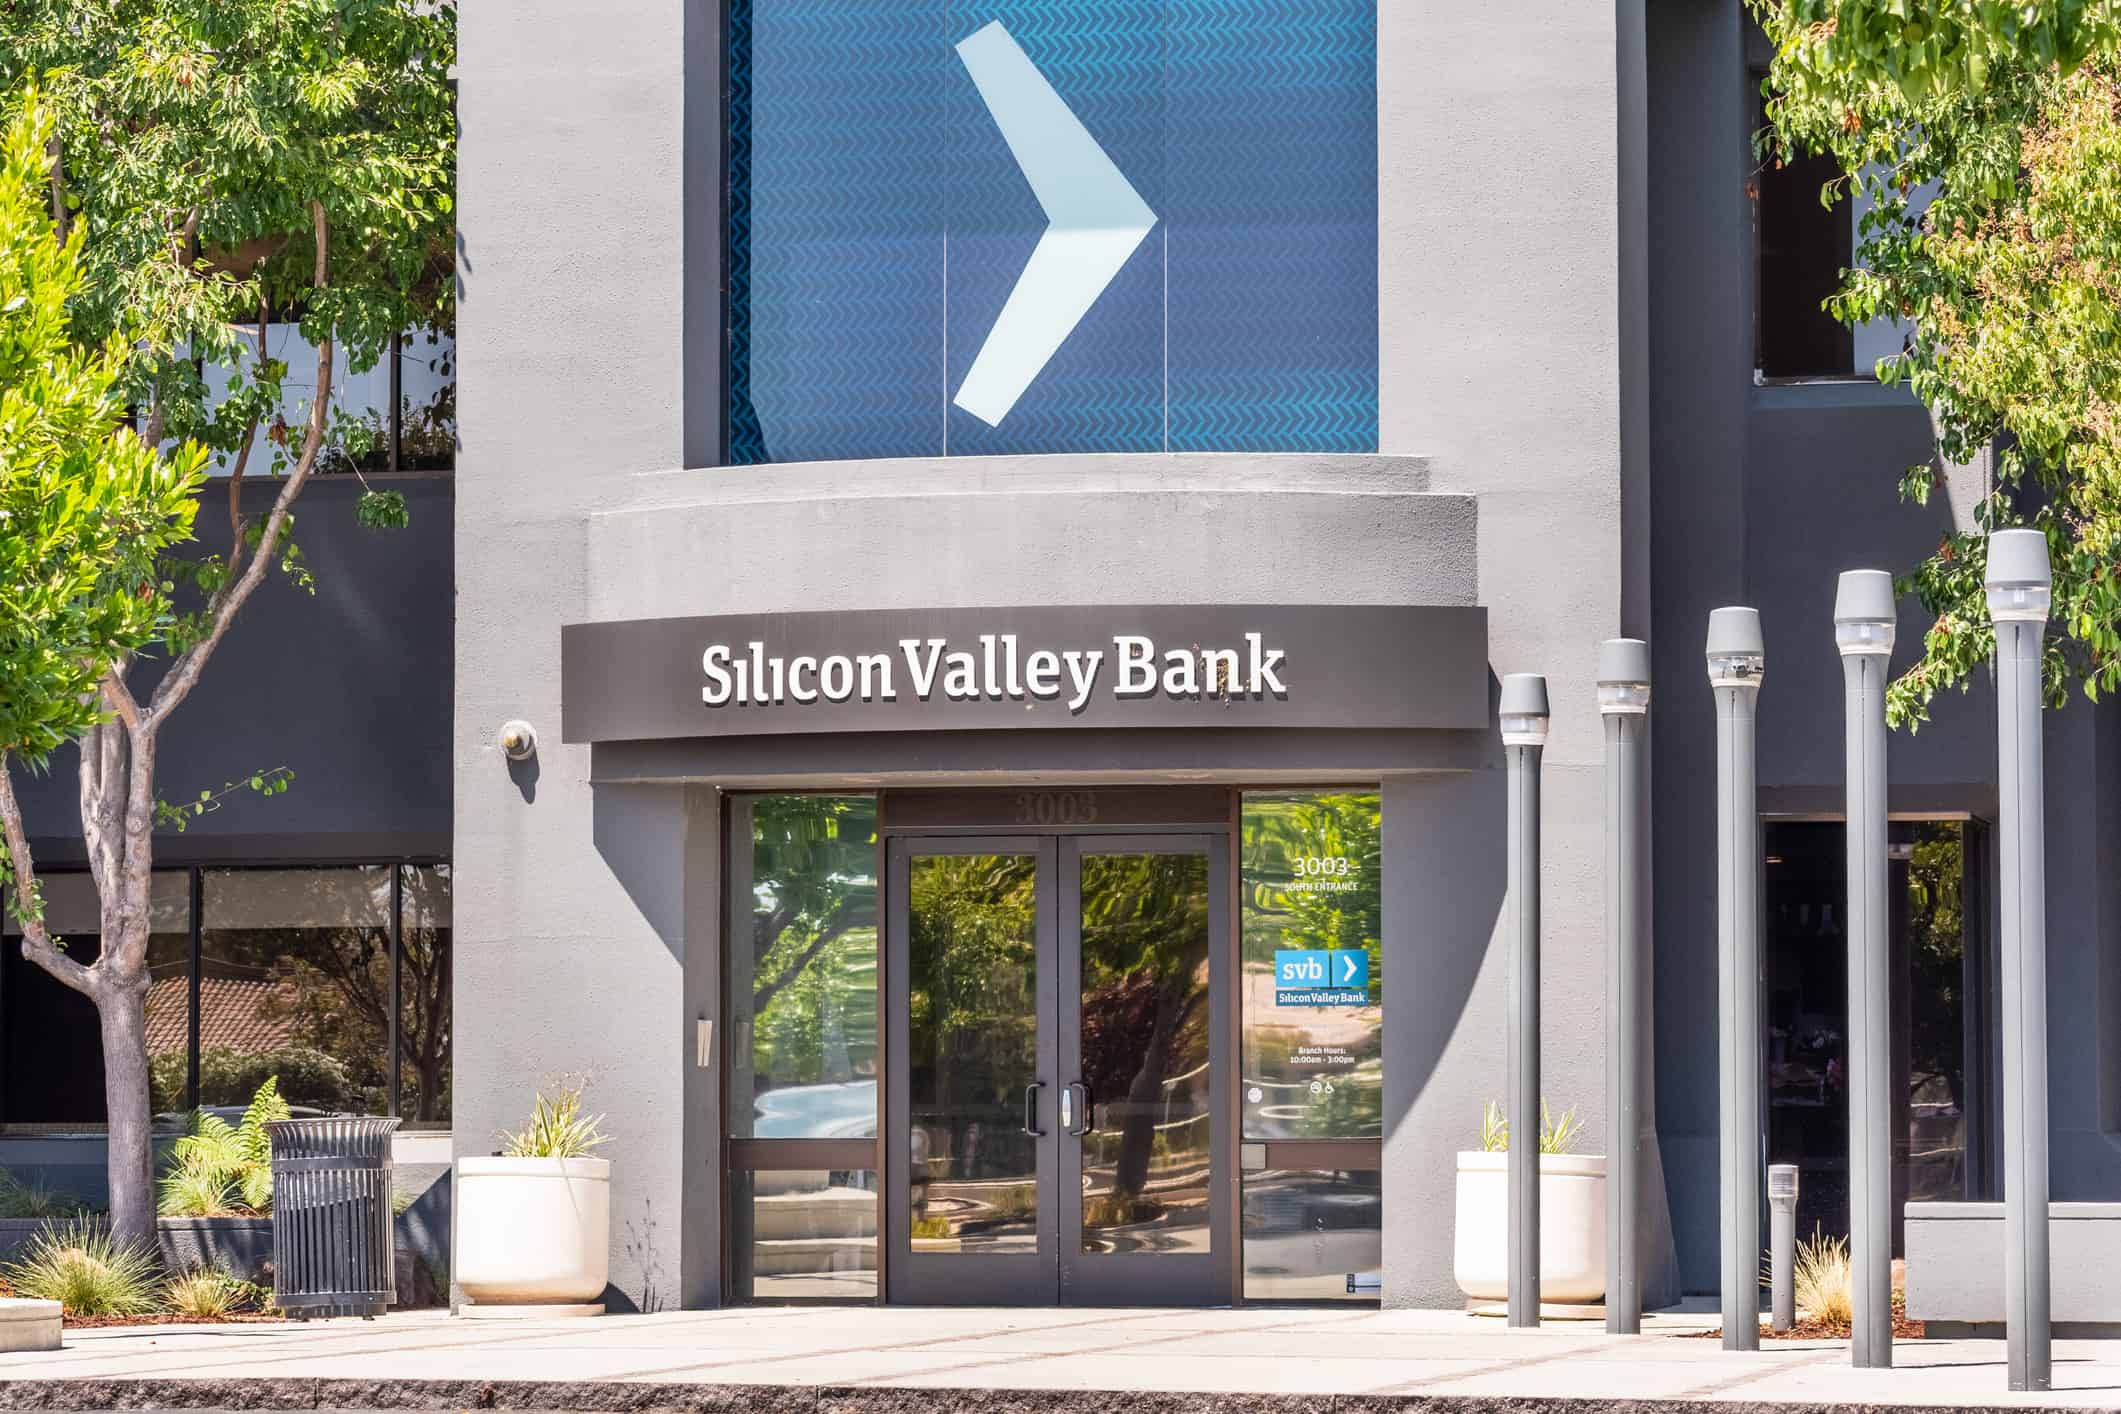 Silicon Valley Bank - Banks Collapsing